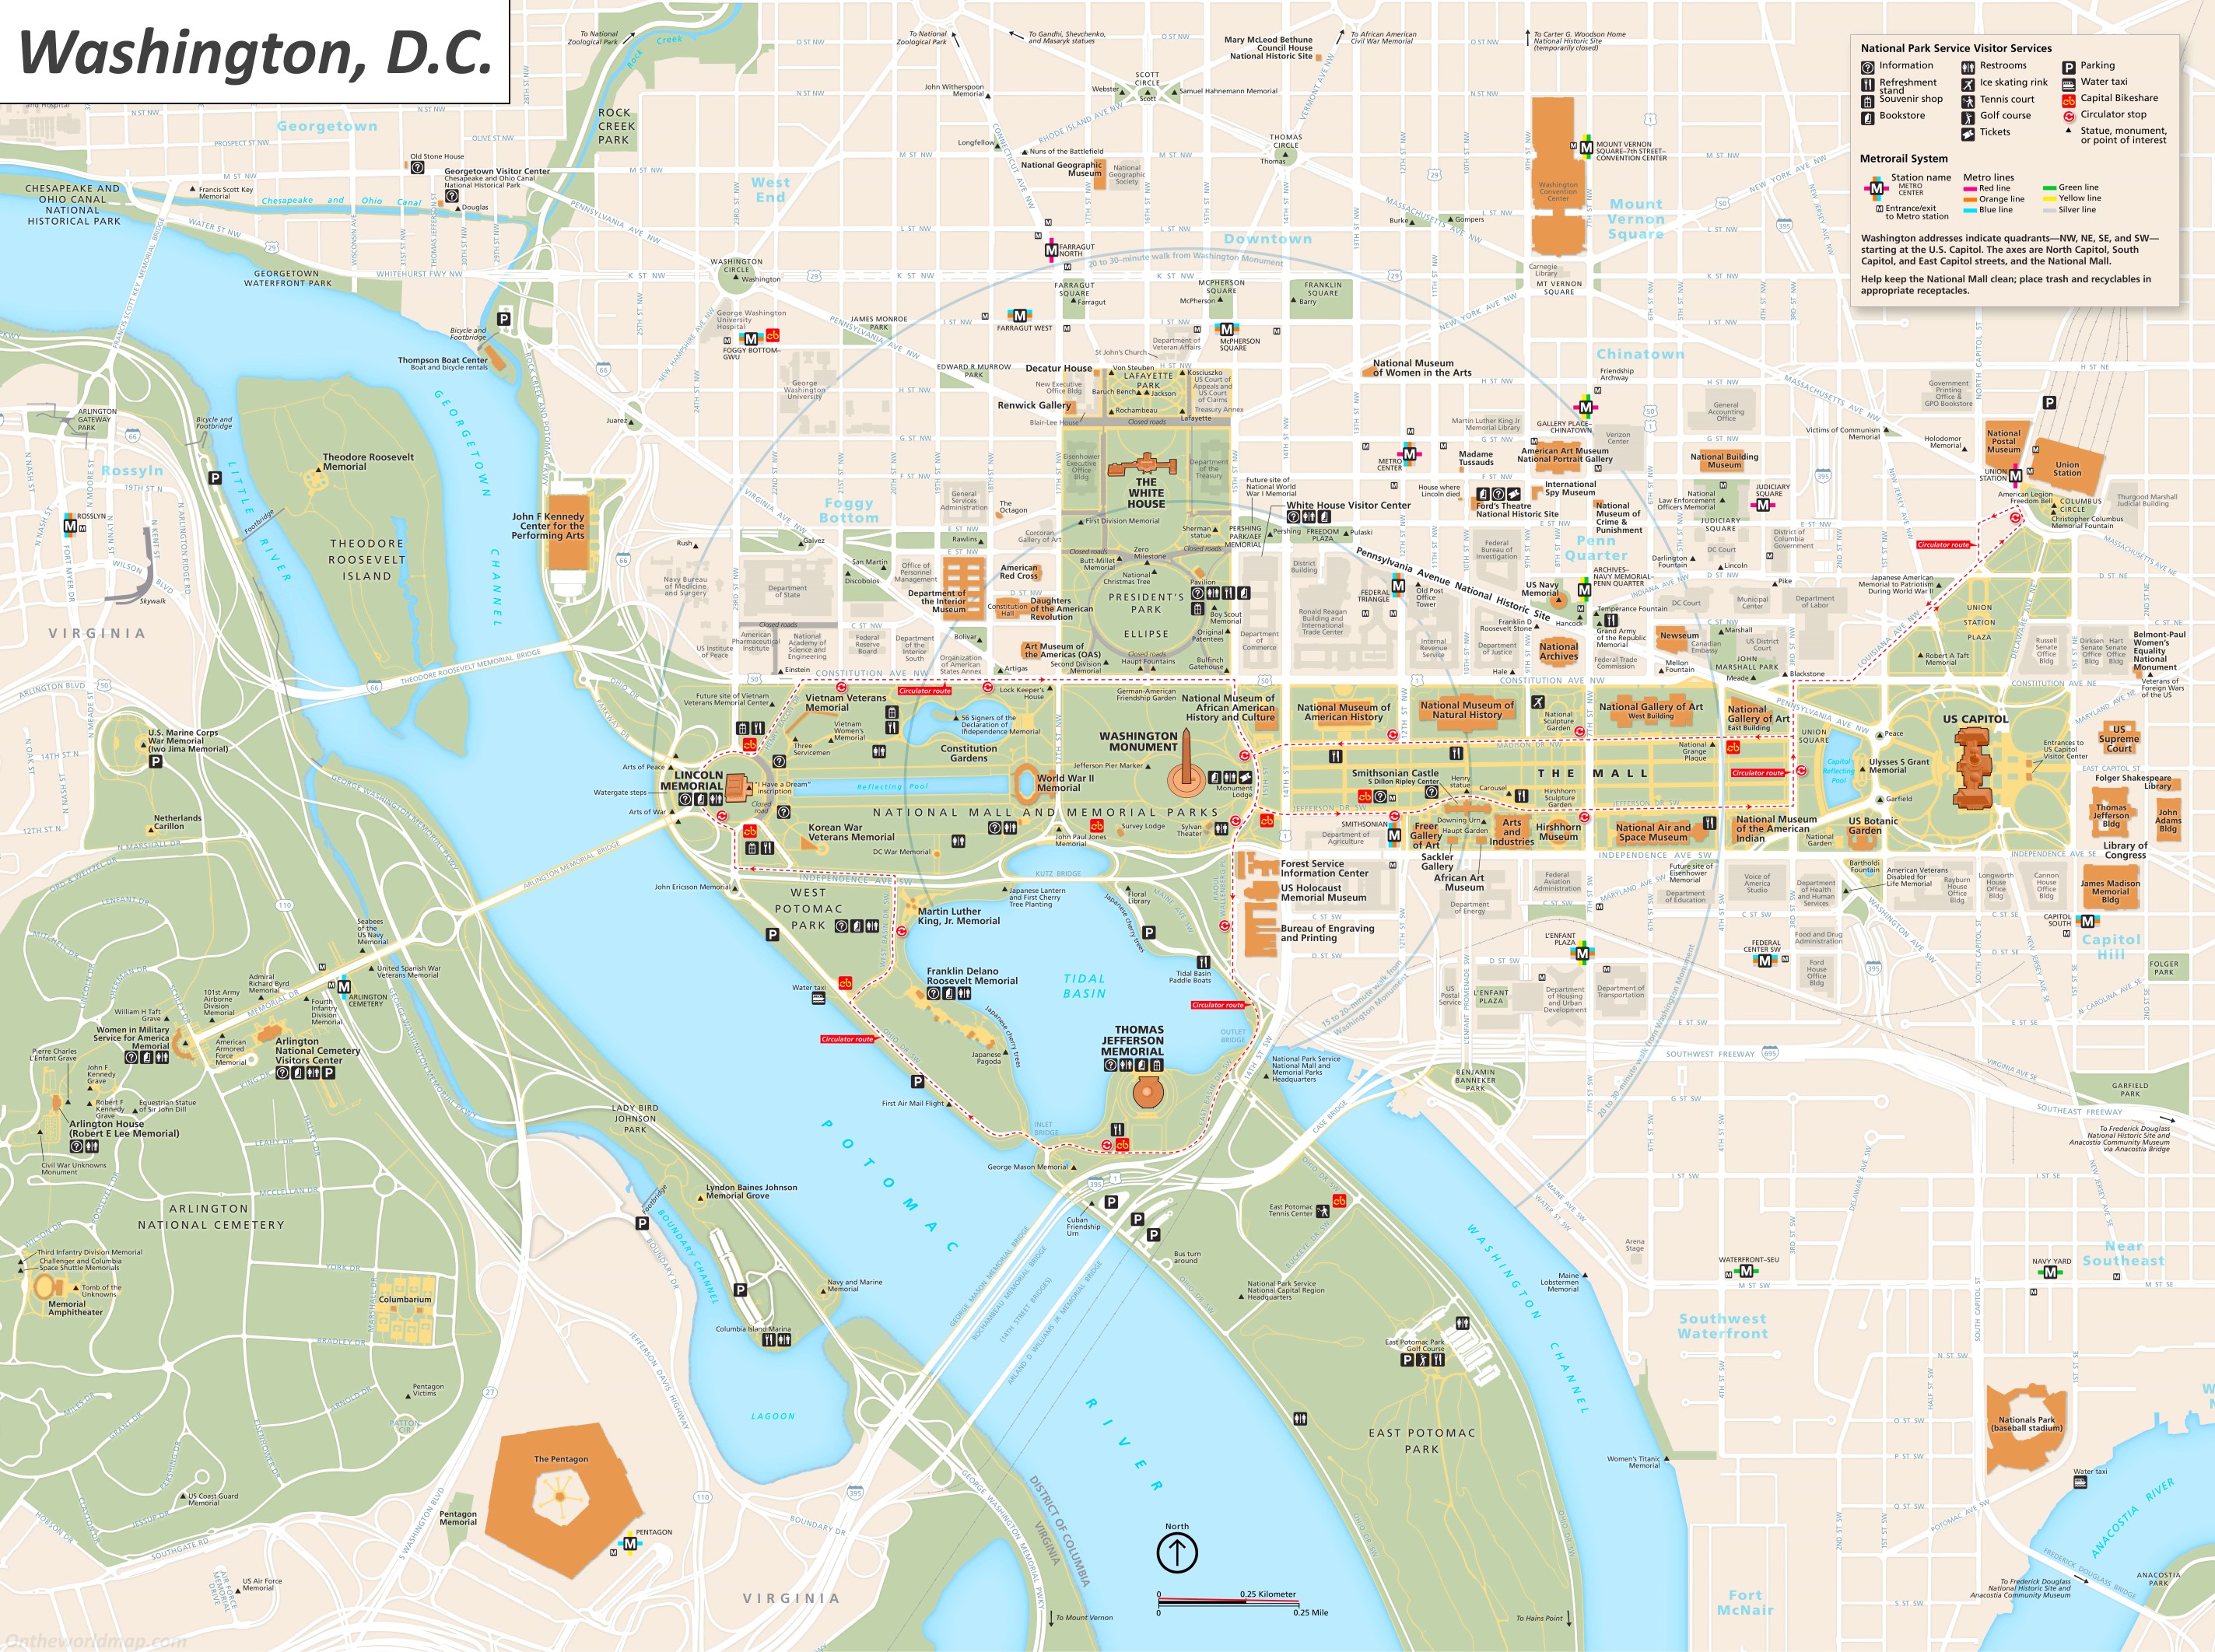 Map Of Washington Dc With Hotels - London Top Attractions Map